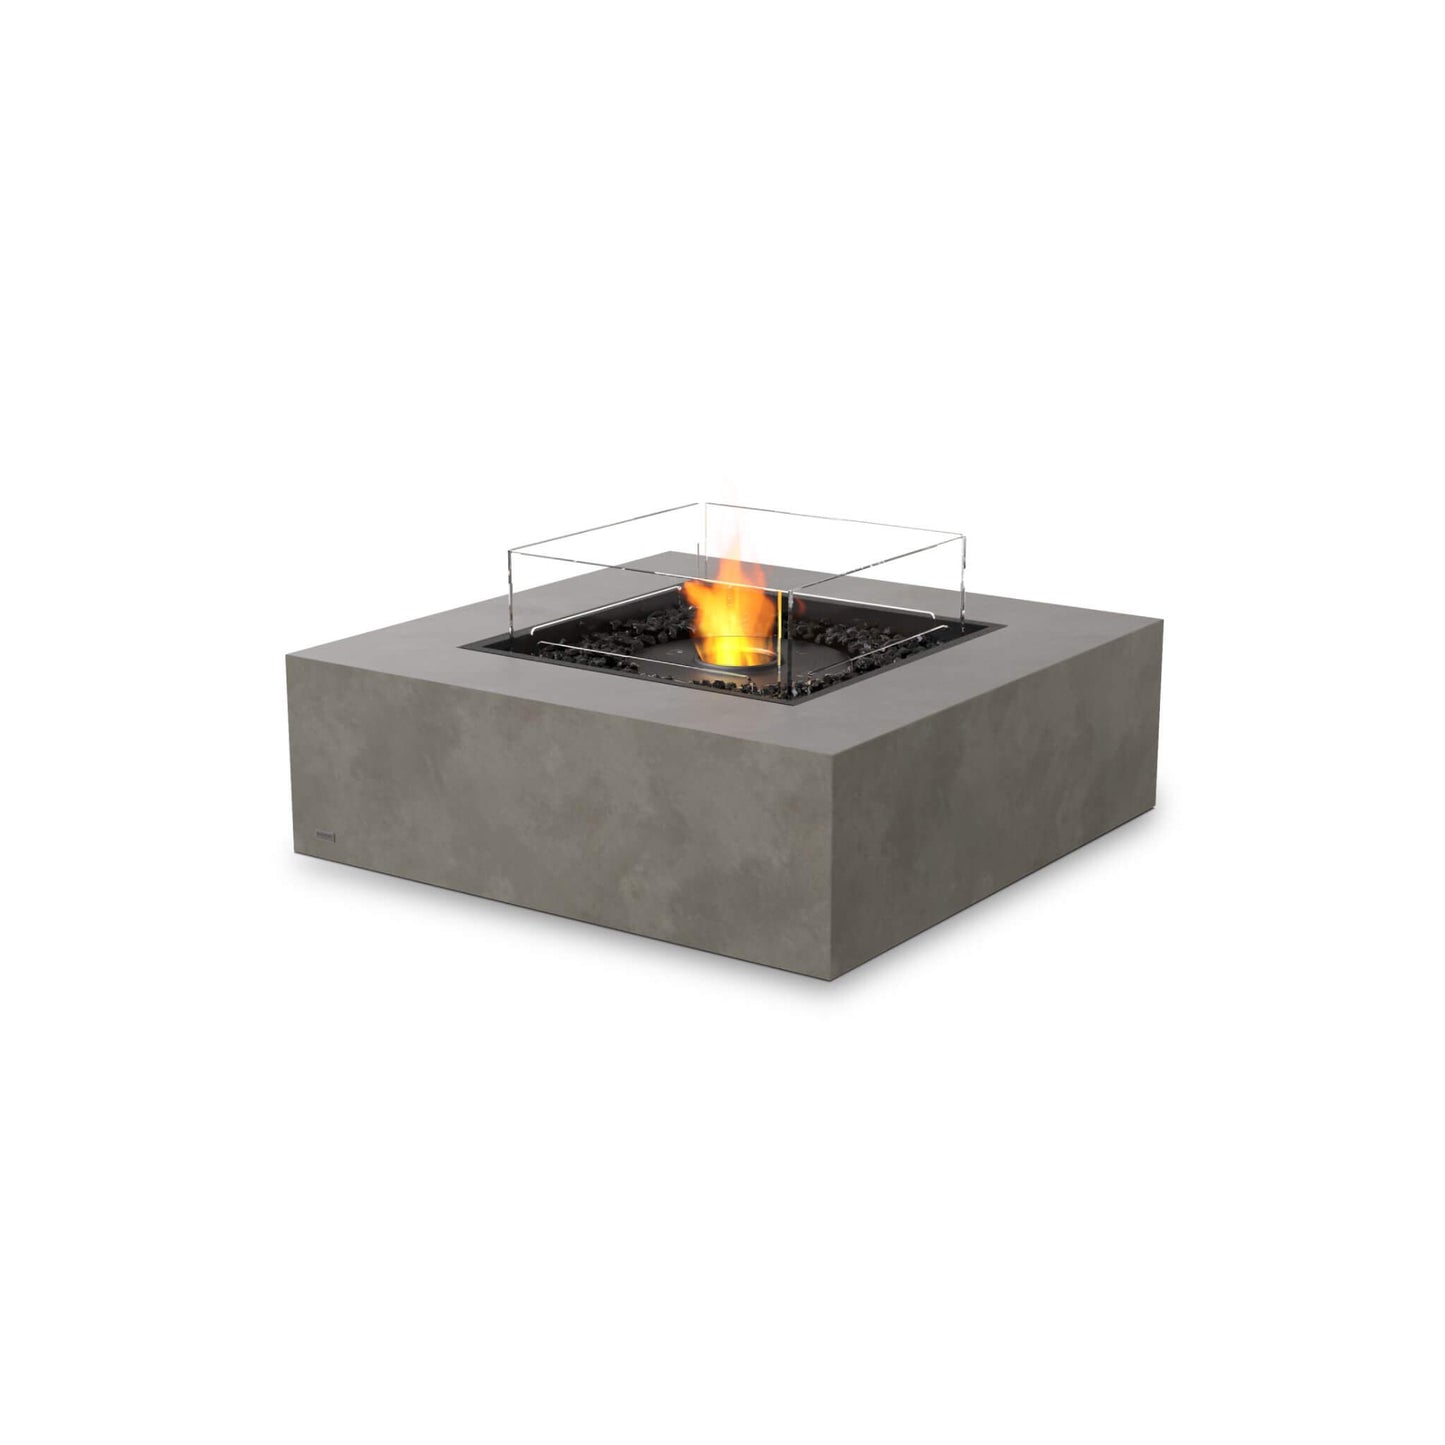 Base 40 Square Concrete Bio Ethanol Fire Pit Coffee Table for in Ntaural (Grey) with glass fire screen Indoor & Outdoor Heating by Ecosmart Fire